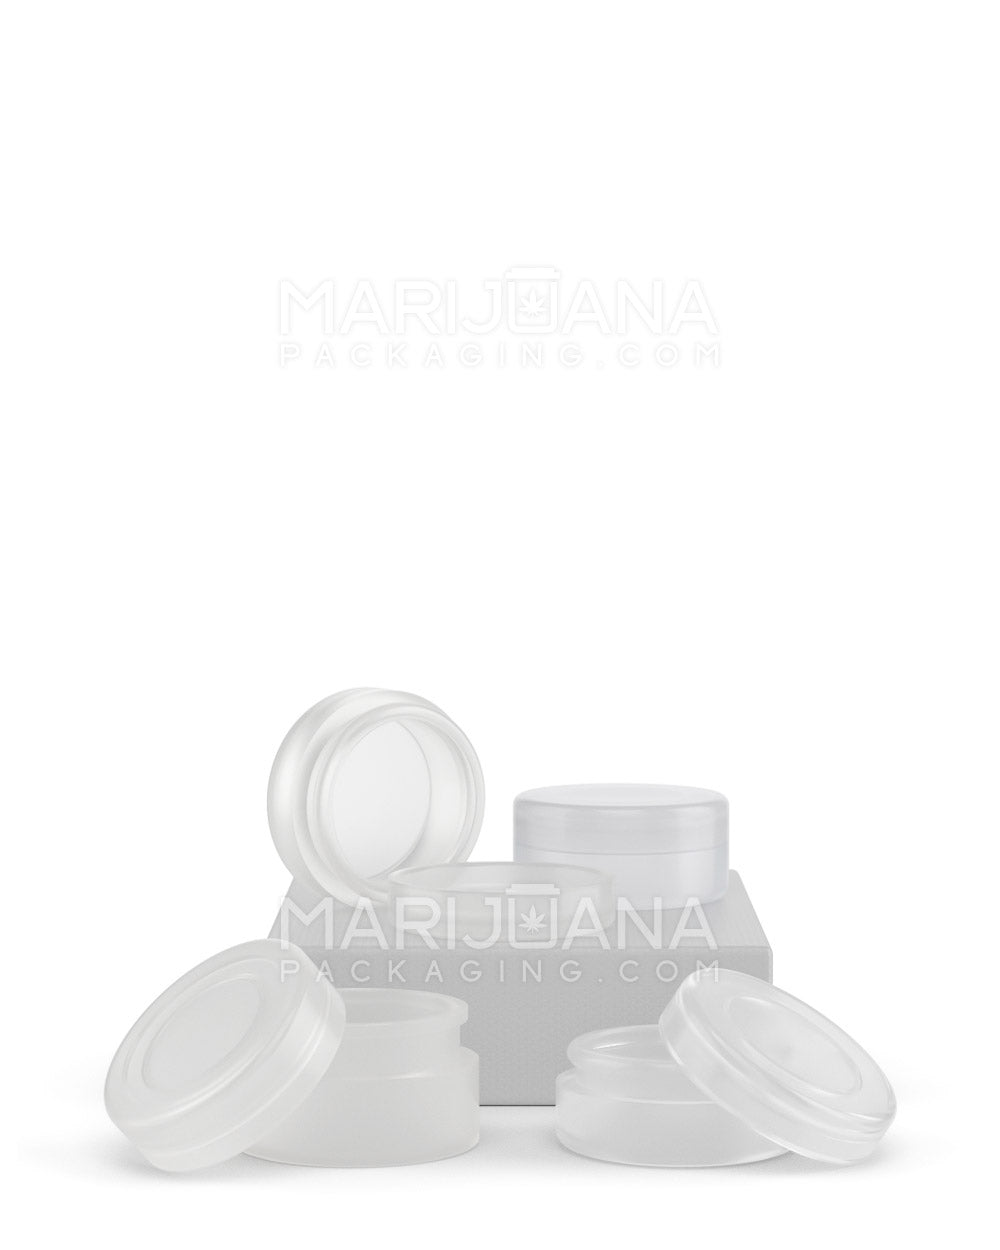 Silicone Dab Containers: Concentrate Dab Pucks for Wax